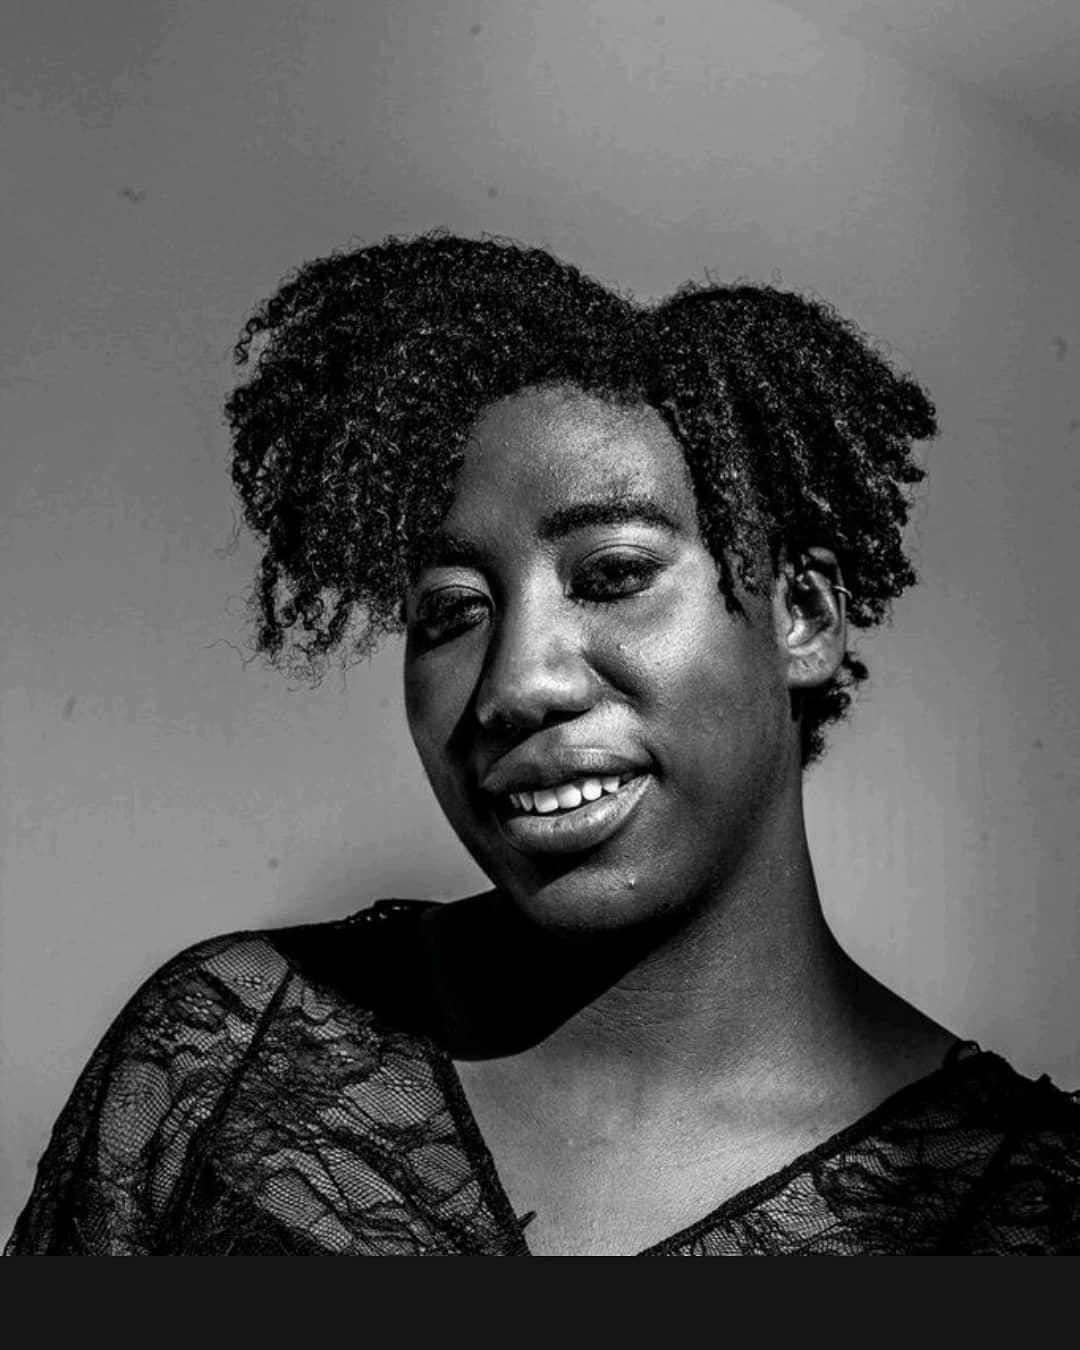 A black and white close-up image of a black person with her head slightly tilted, smiling into the camera.